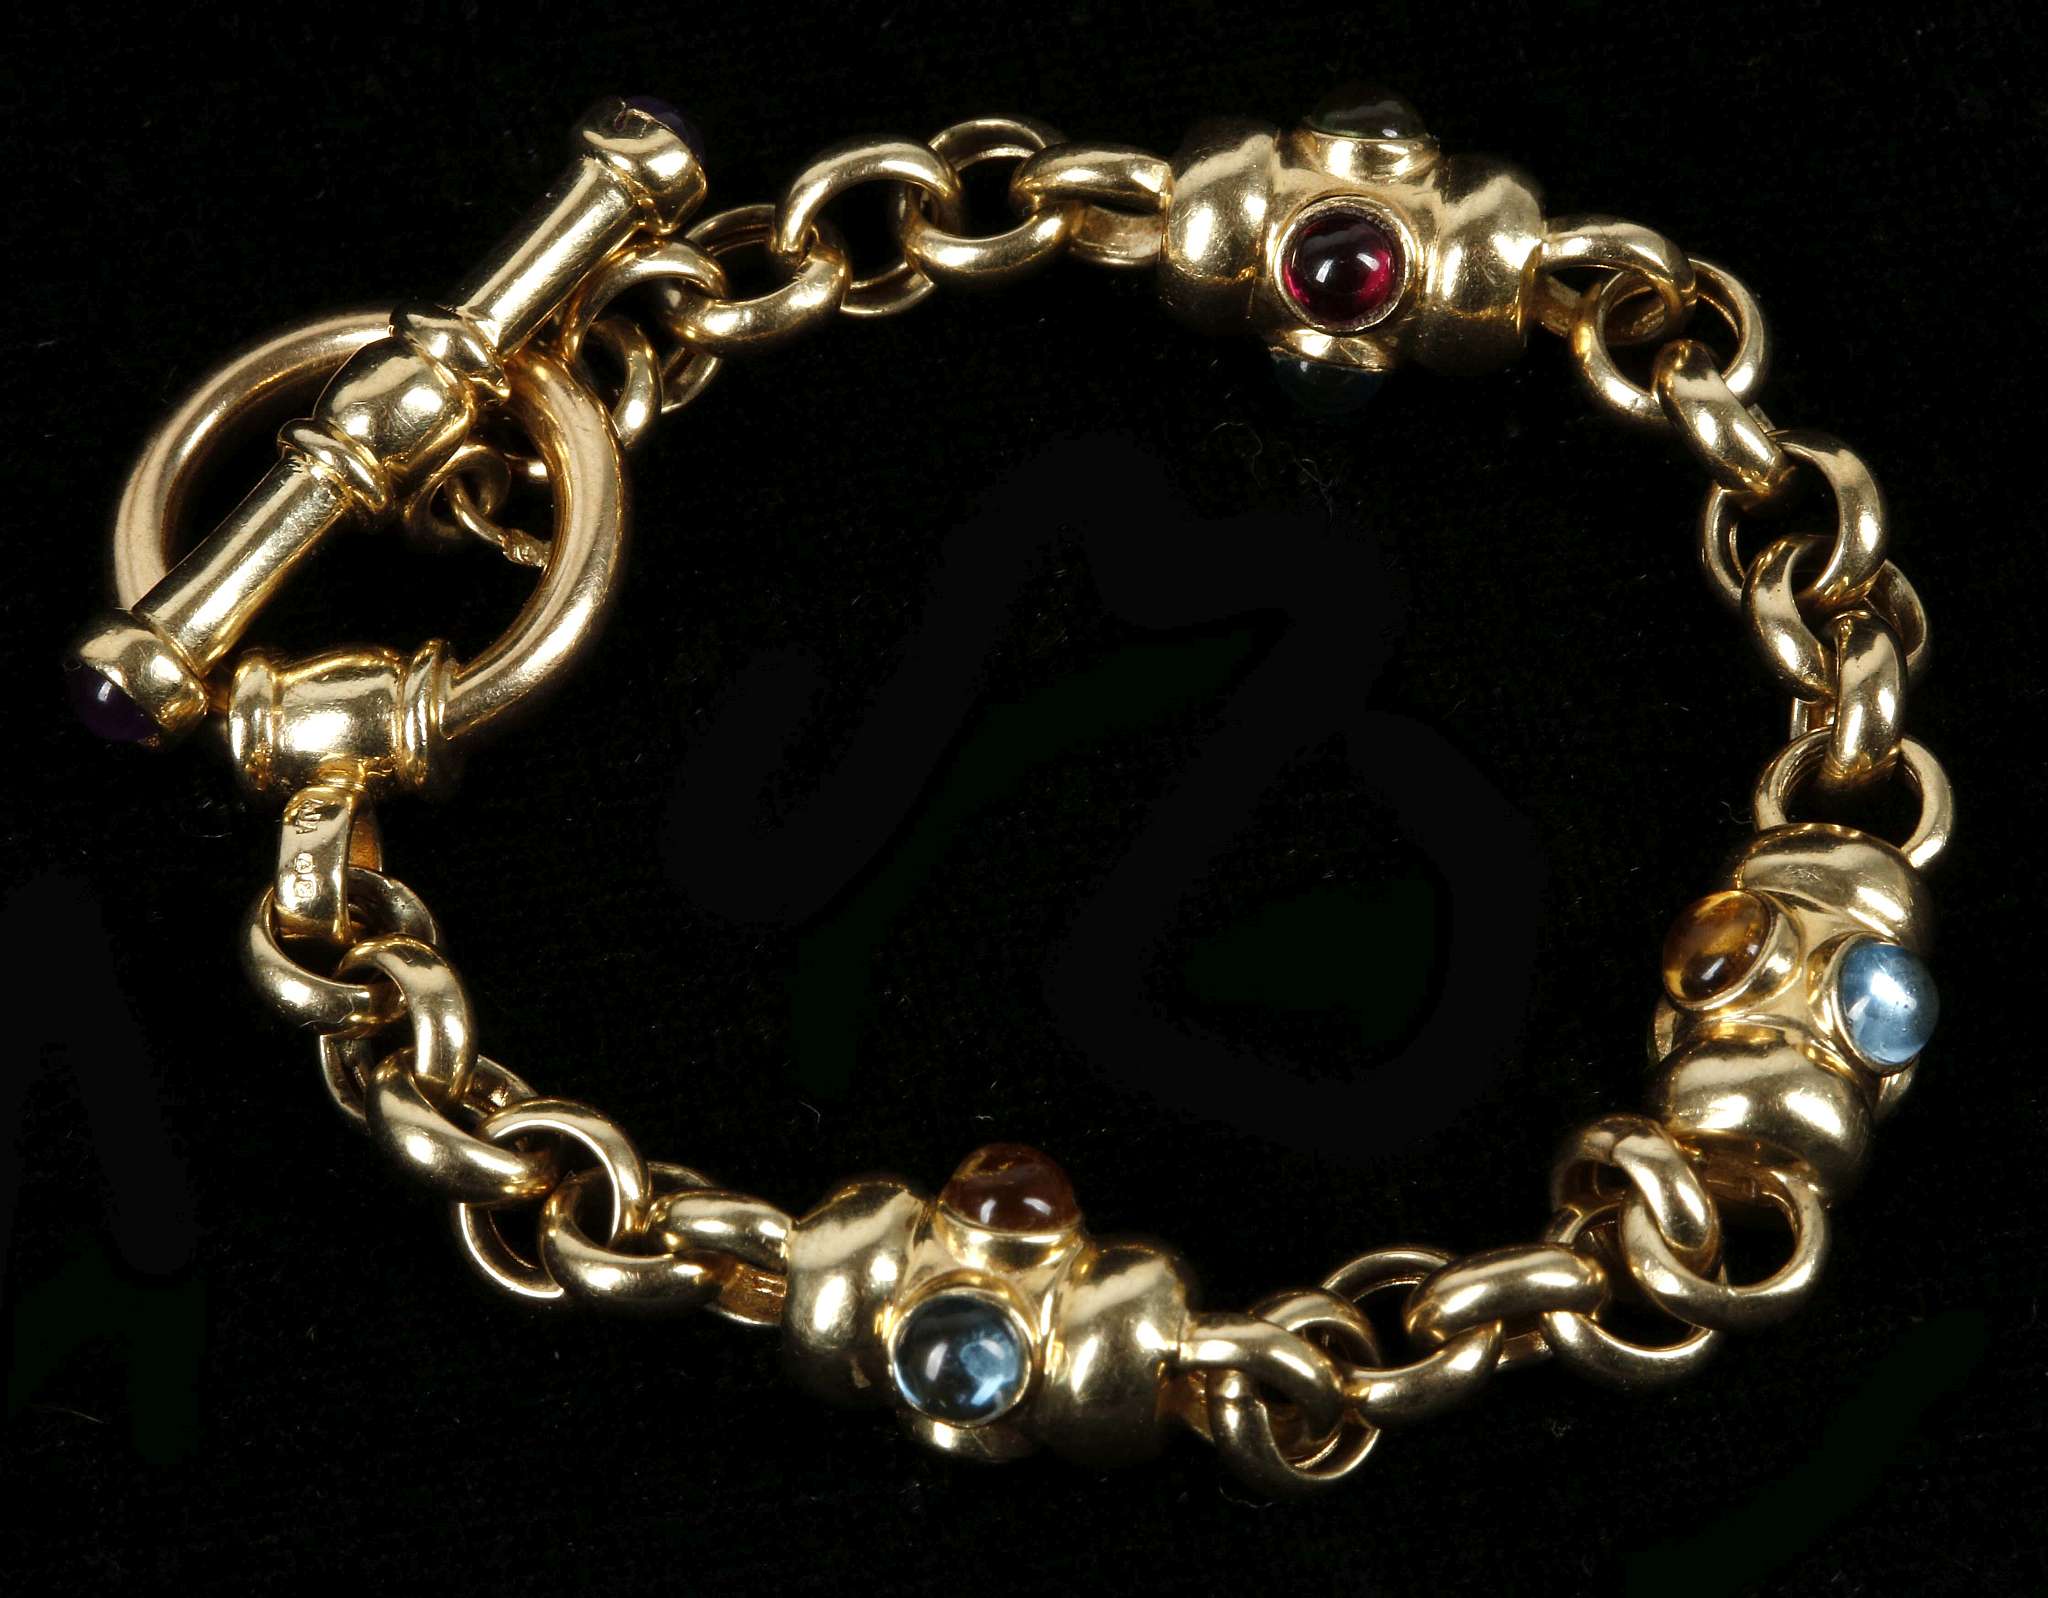 An 18ct gold fancy link bracelet, set with cabouchon garnets, citrine, topaz and peridot